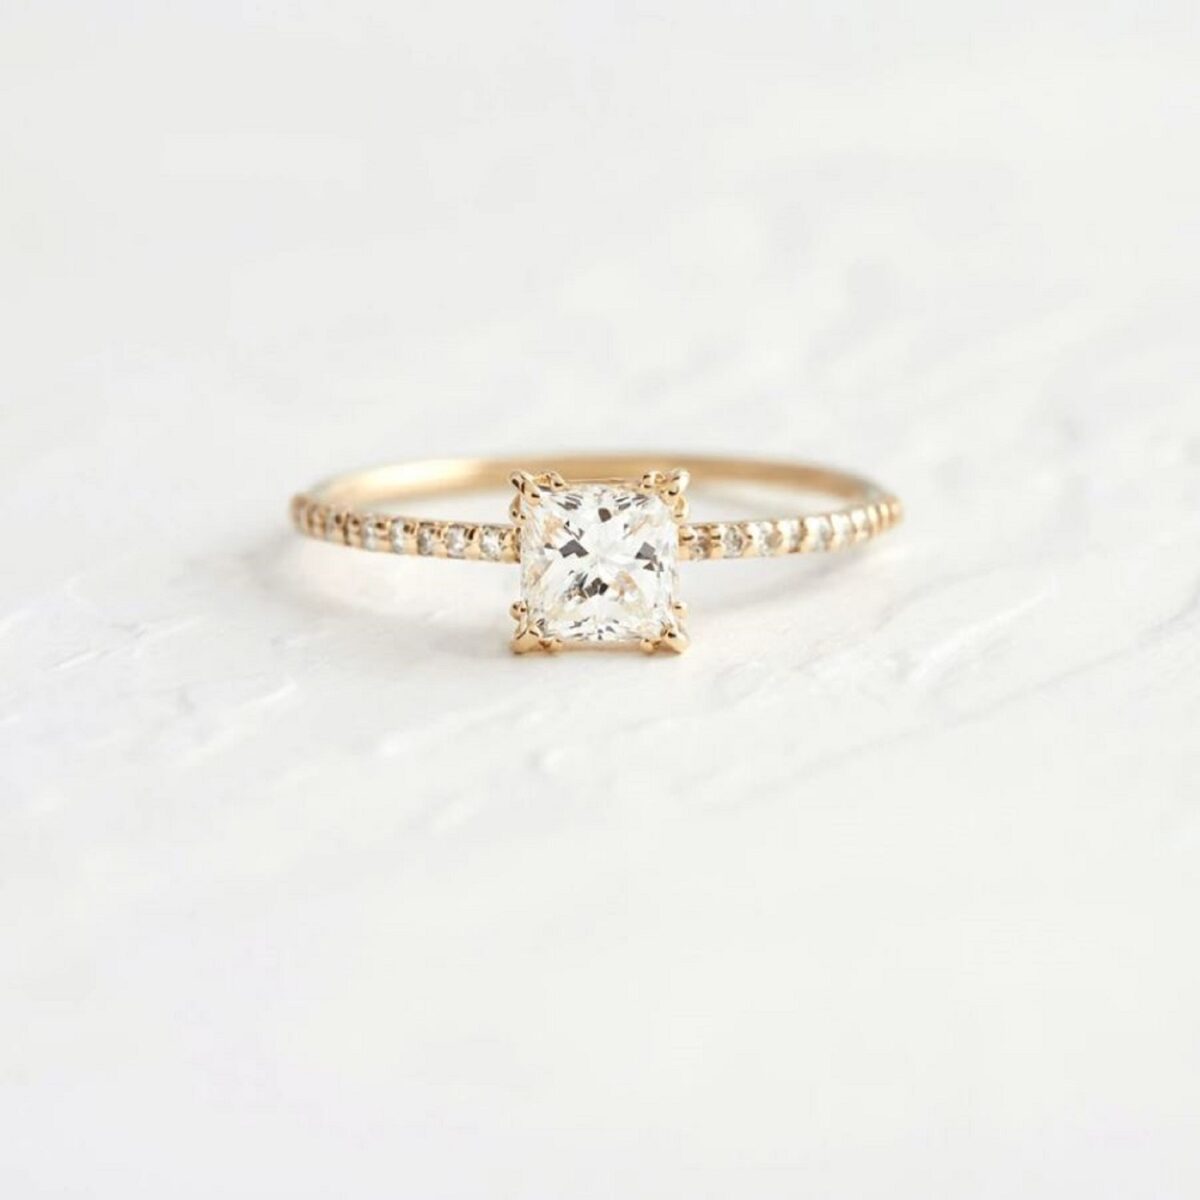 Tiny cushion cut lab grown diamond ring with accent round diamond as pave set on band crafted in 14k yellow gold.